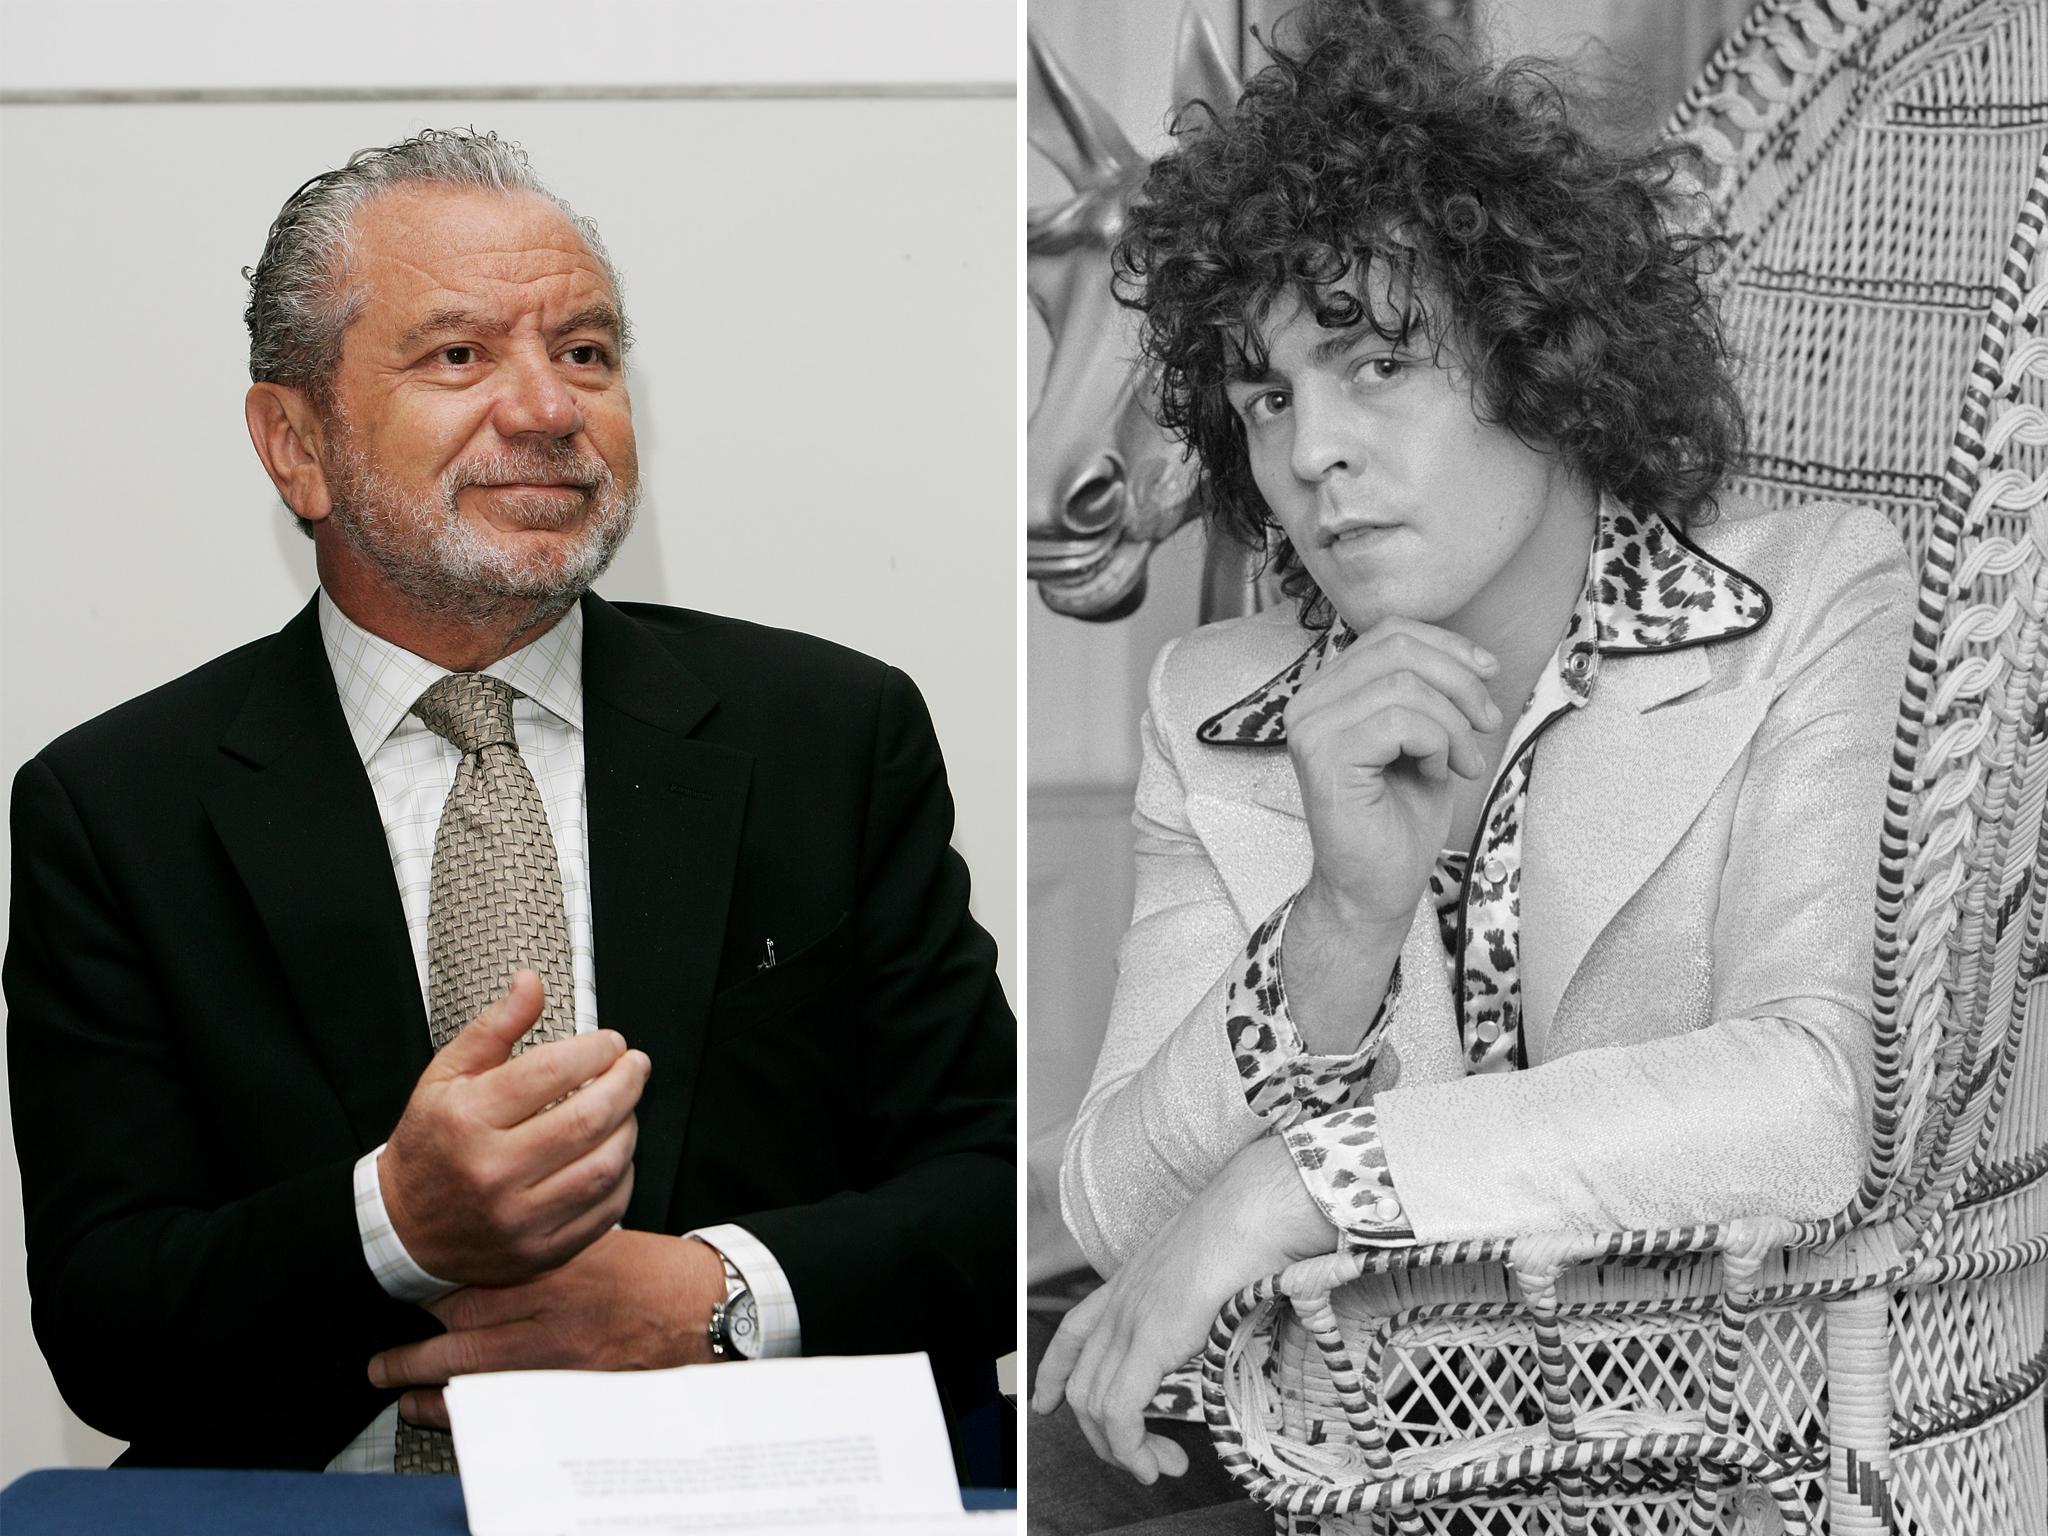 Lord Sugar and the late Marc Bolan went to the same school, though their lives diverged somewhat thereafter